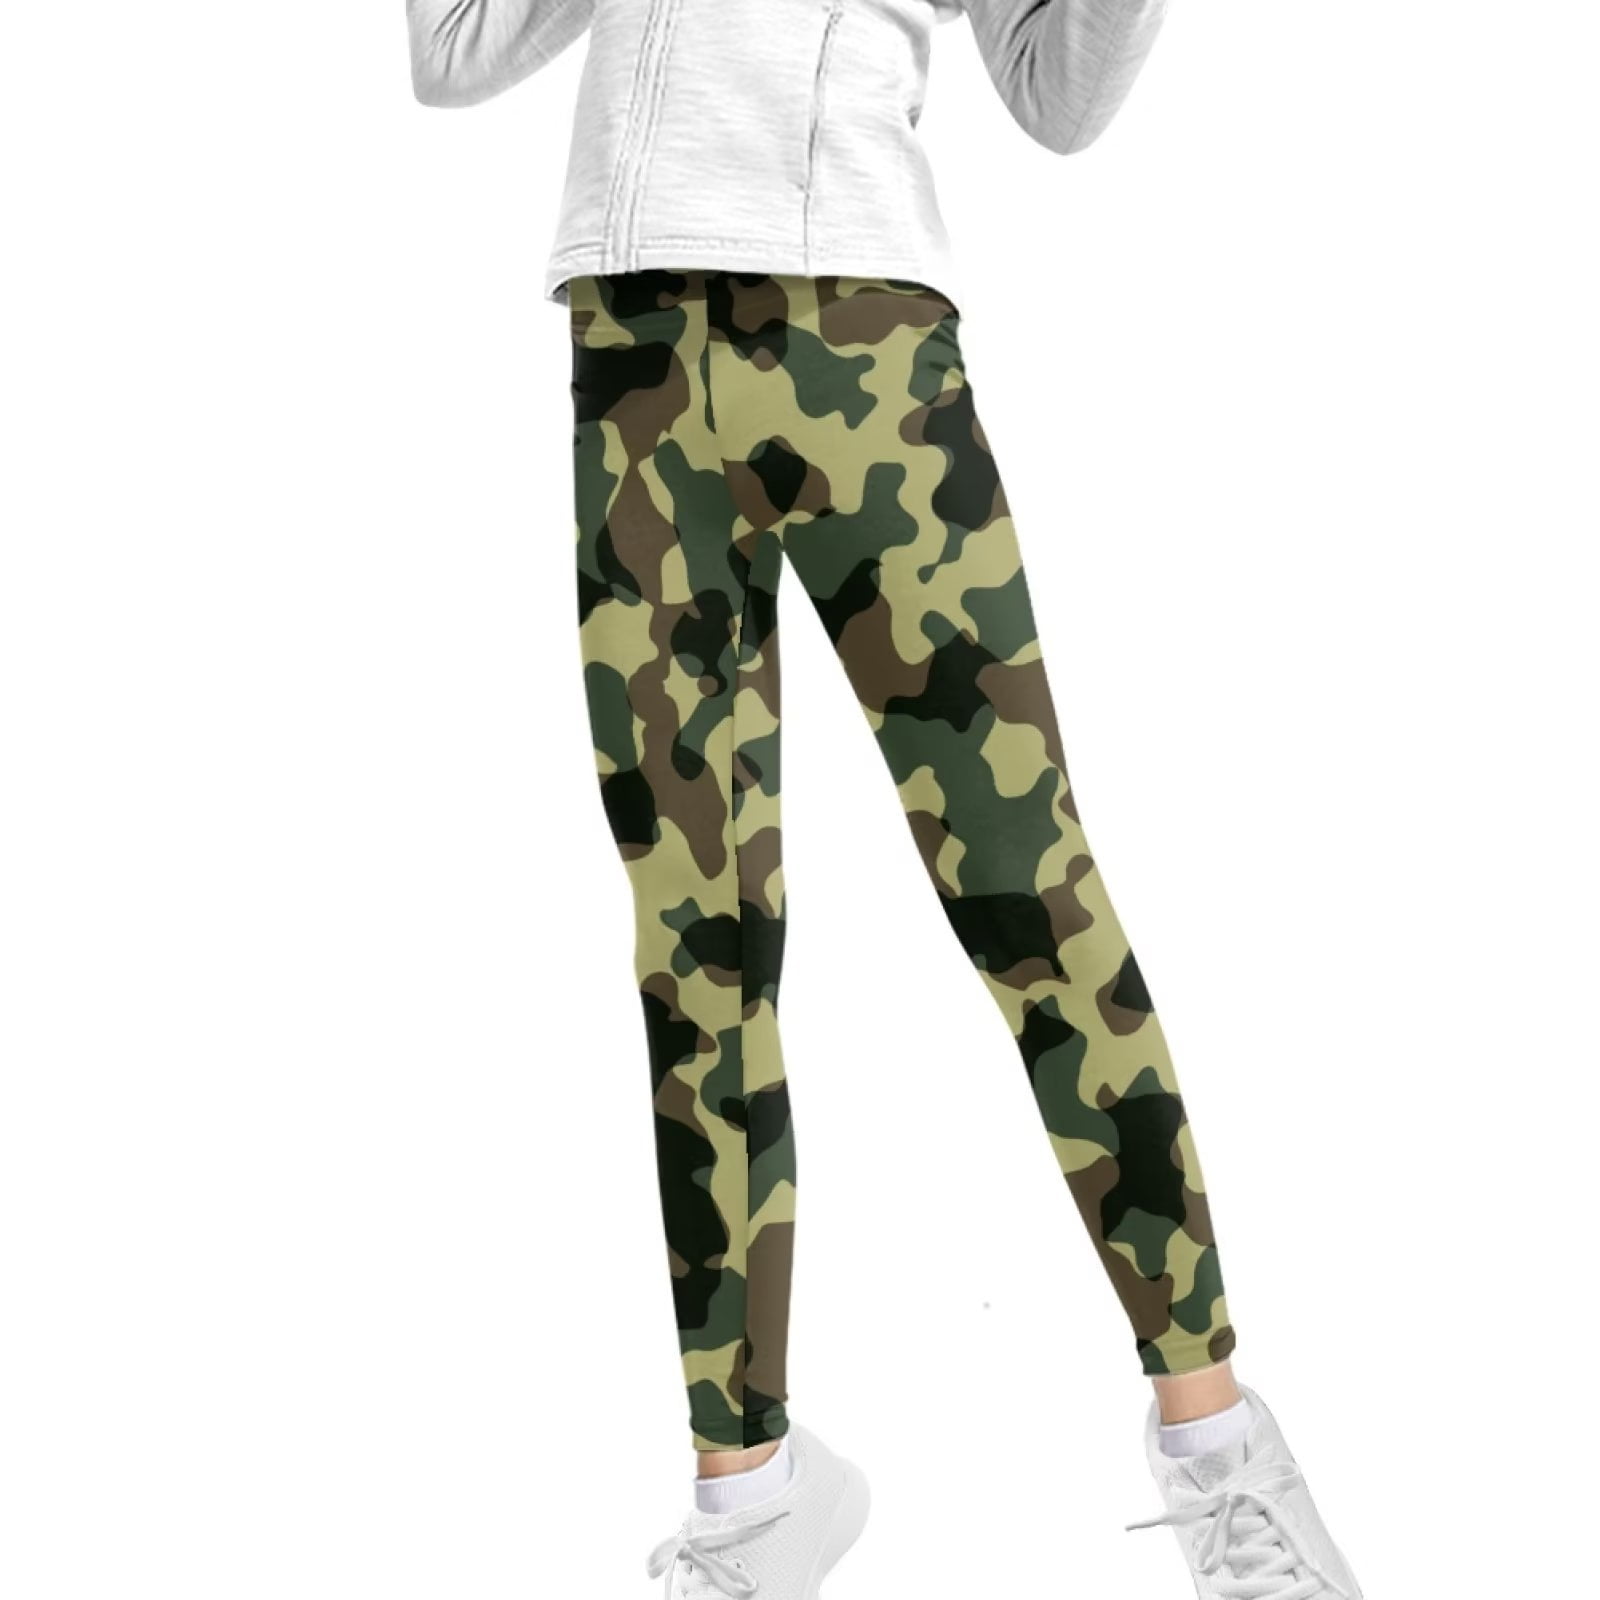 FKELYI Kids Leggings with Camo Hunting Army Size 6-7 Years Breathable  Hiking Girls Tights Durable Travel Yoga Pants High Waisted